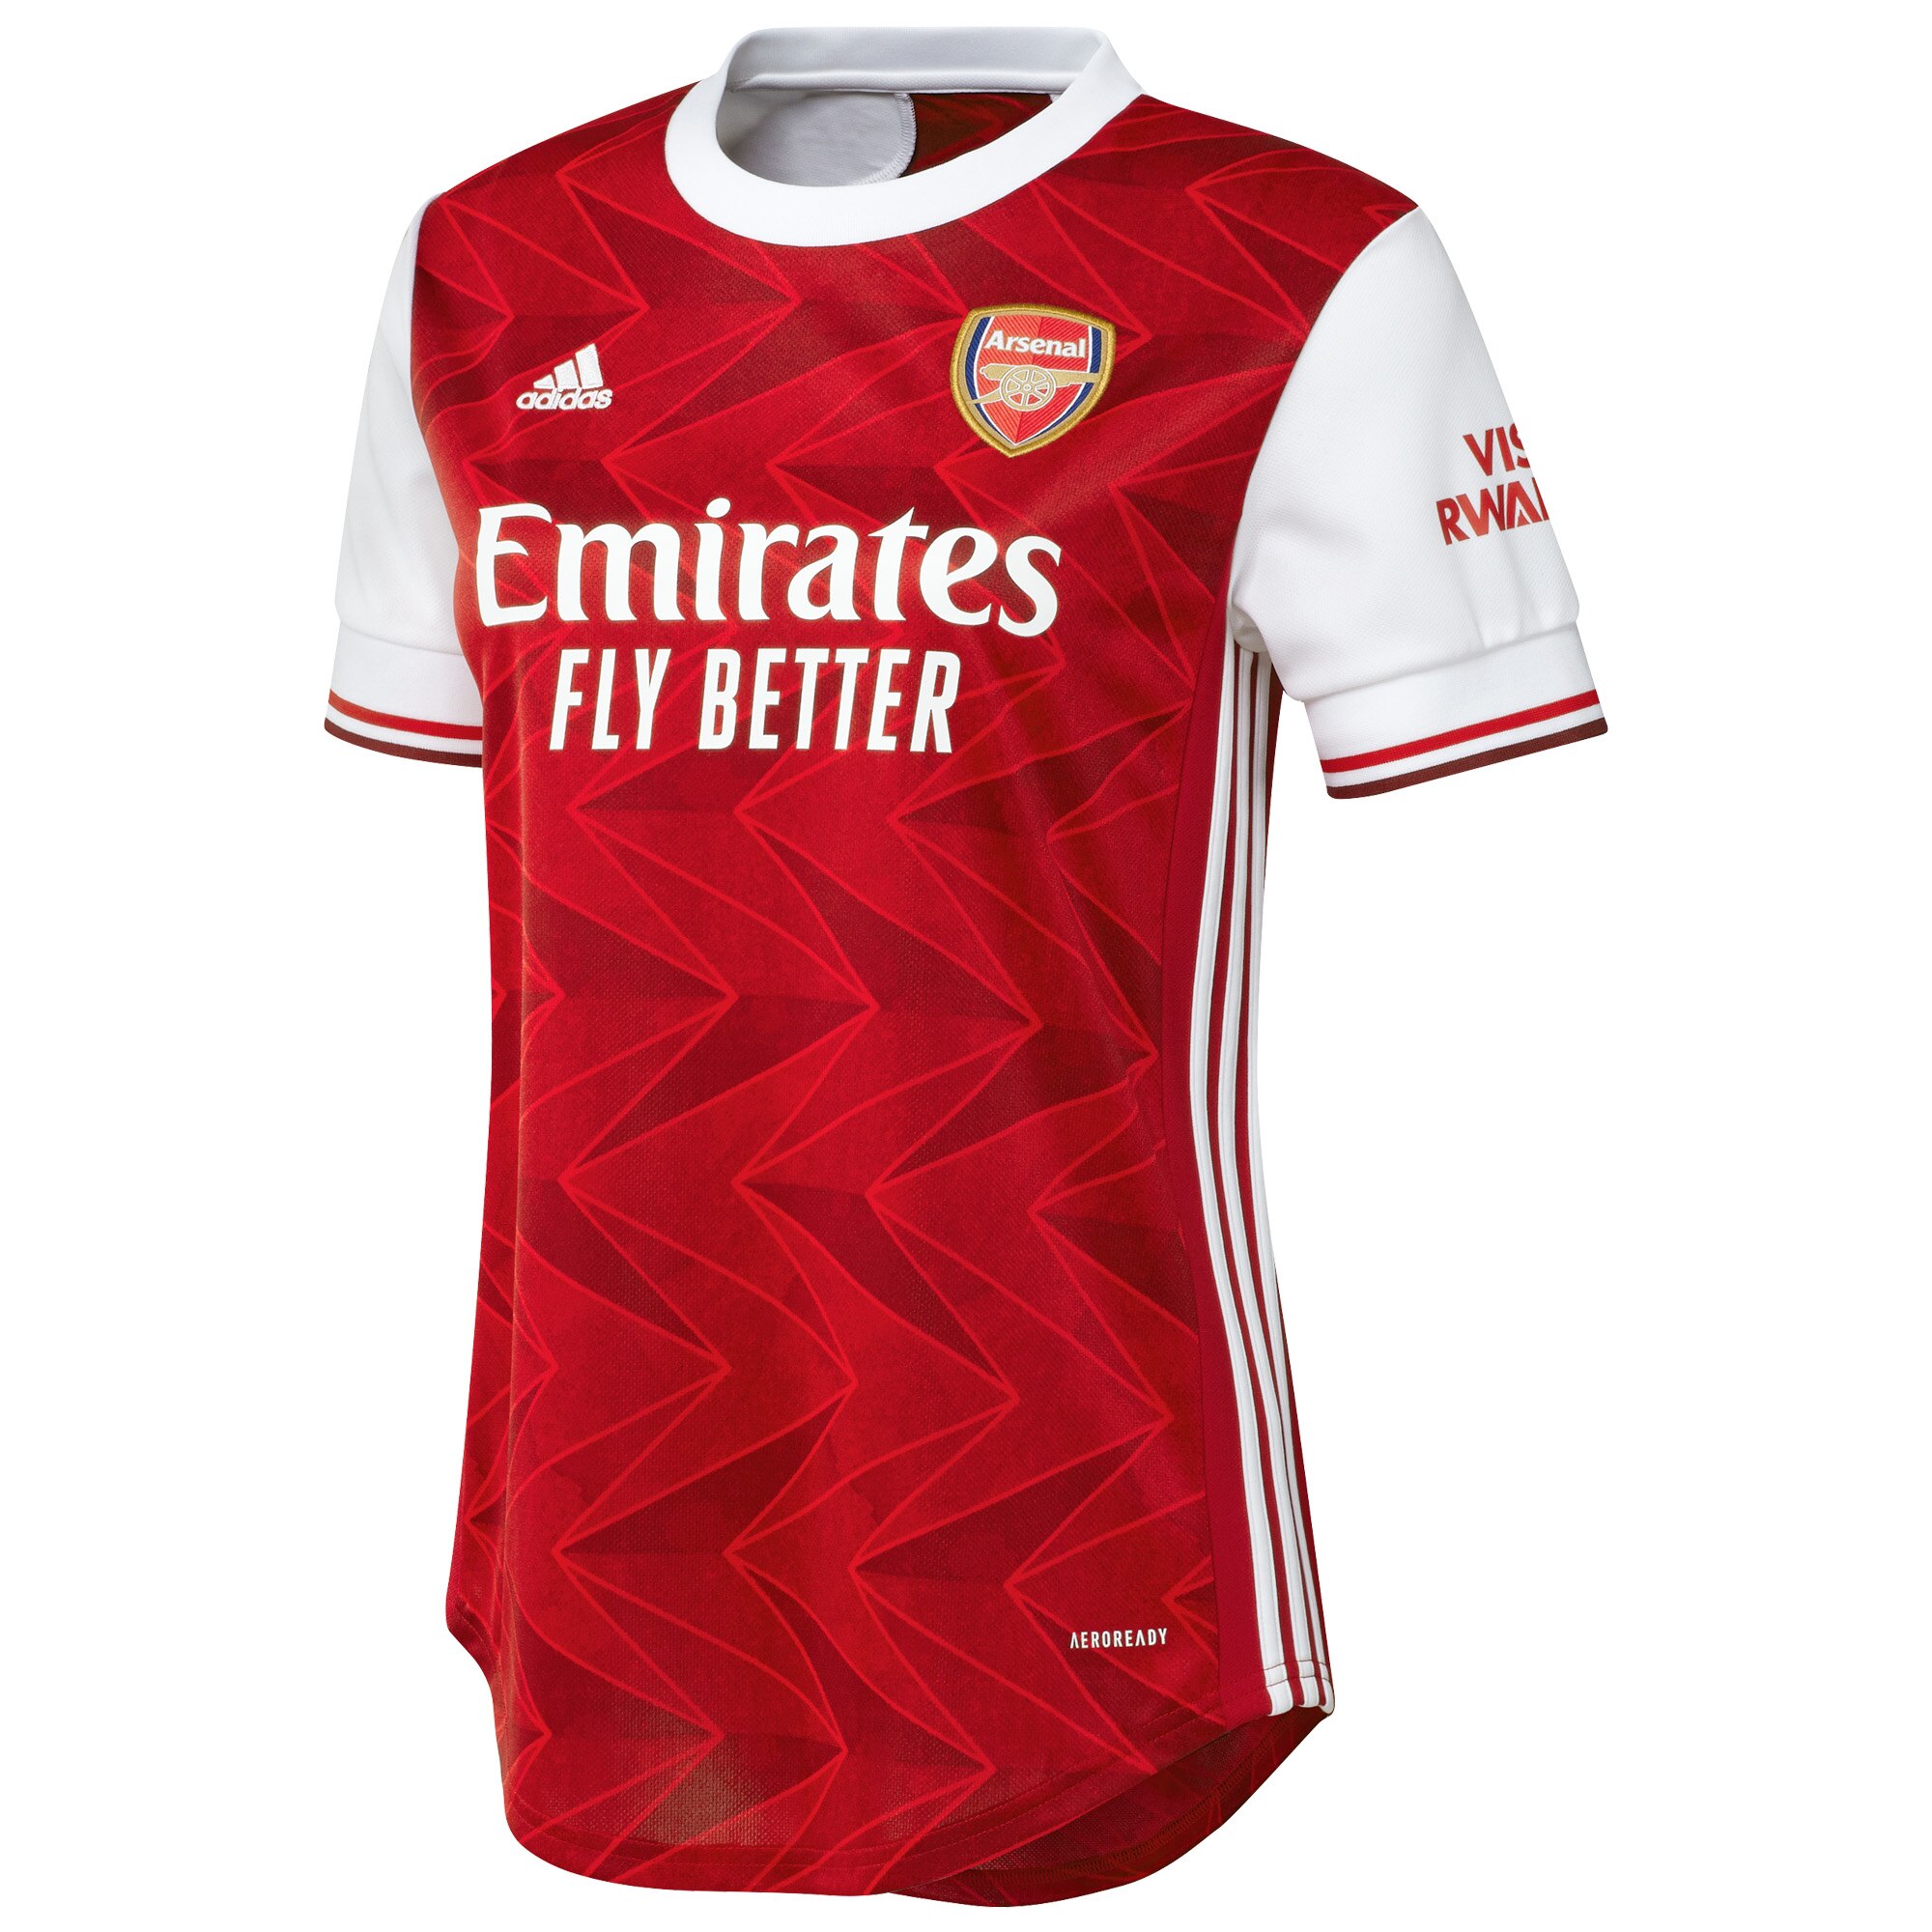 Omaillots Maillot foot Arsenal Femme Domicile 2020 2021